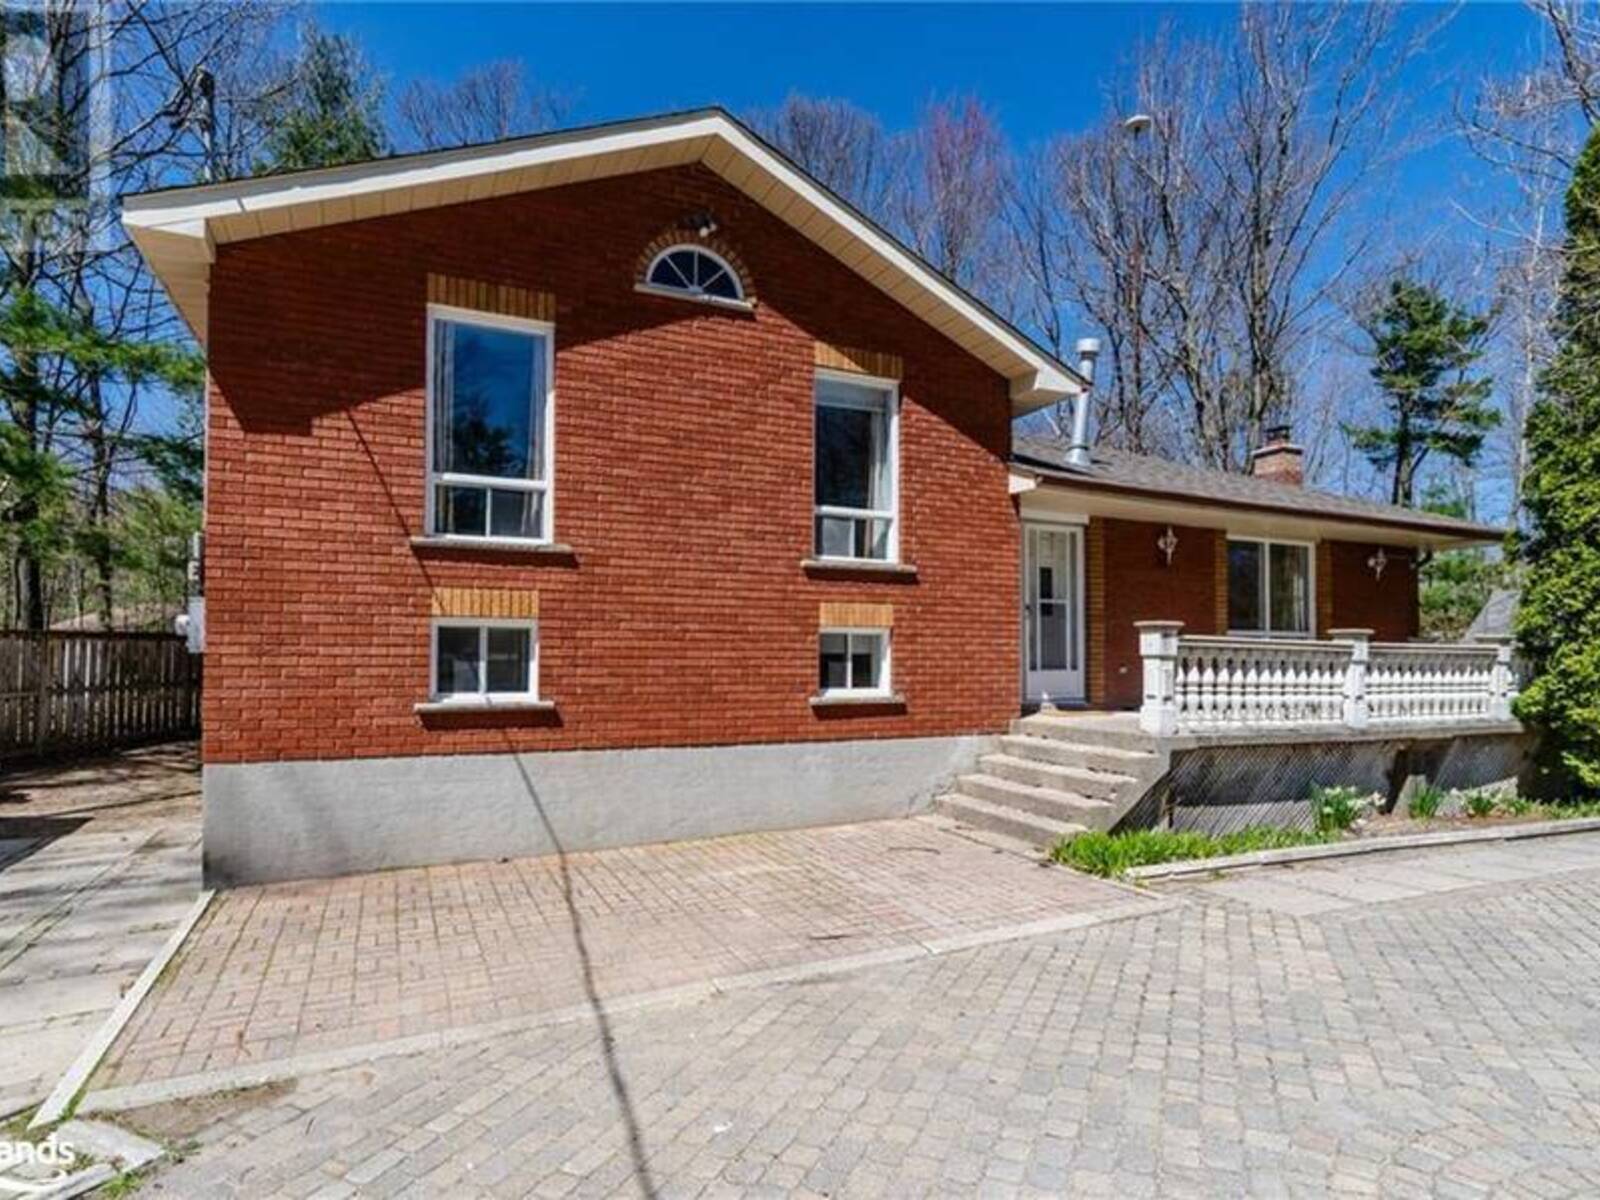 97 FOREST Circle, Tiny, Ontario L9M 0H4